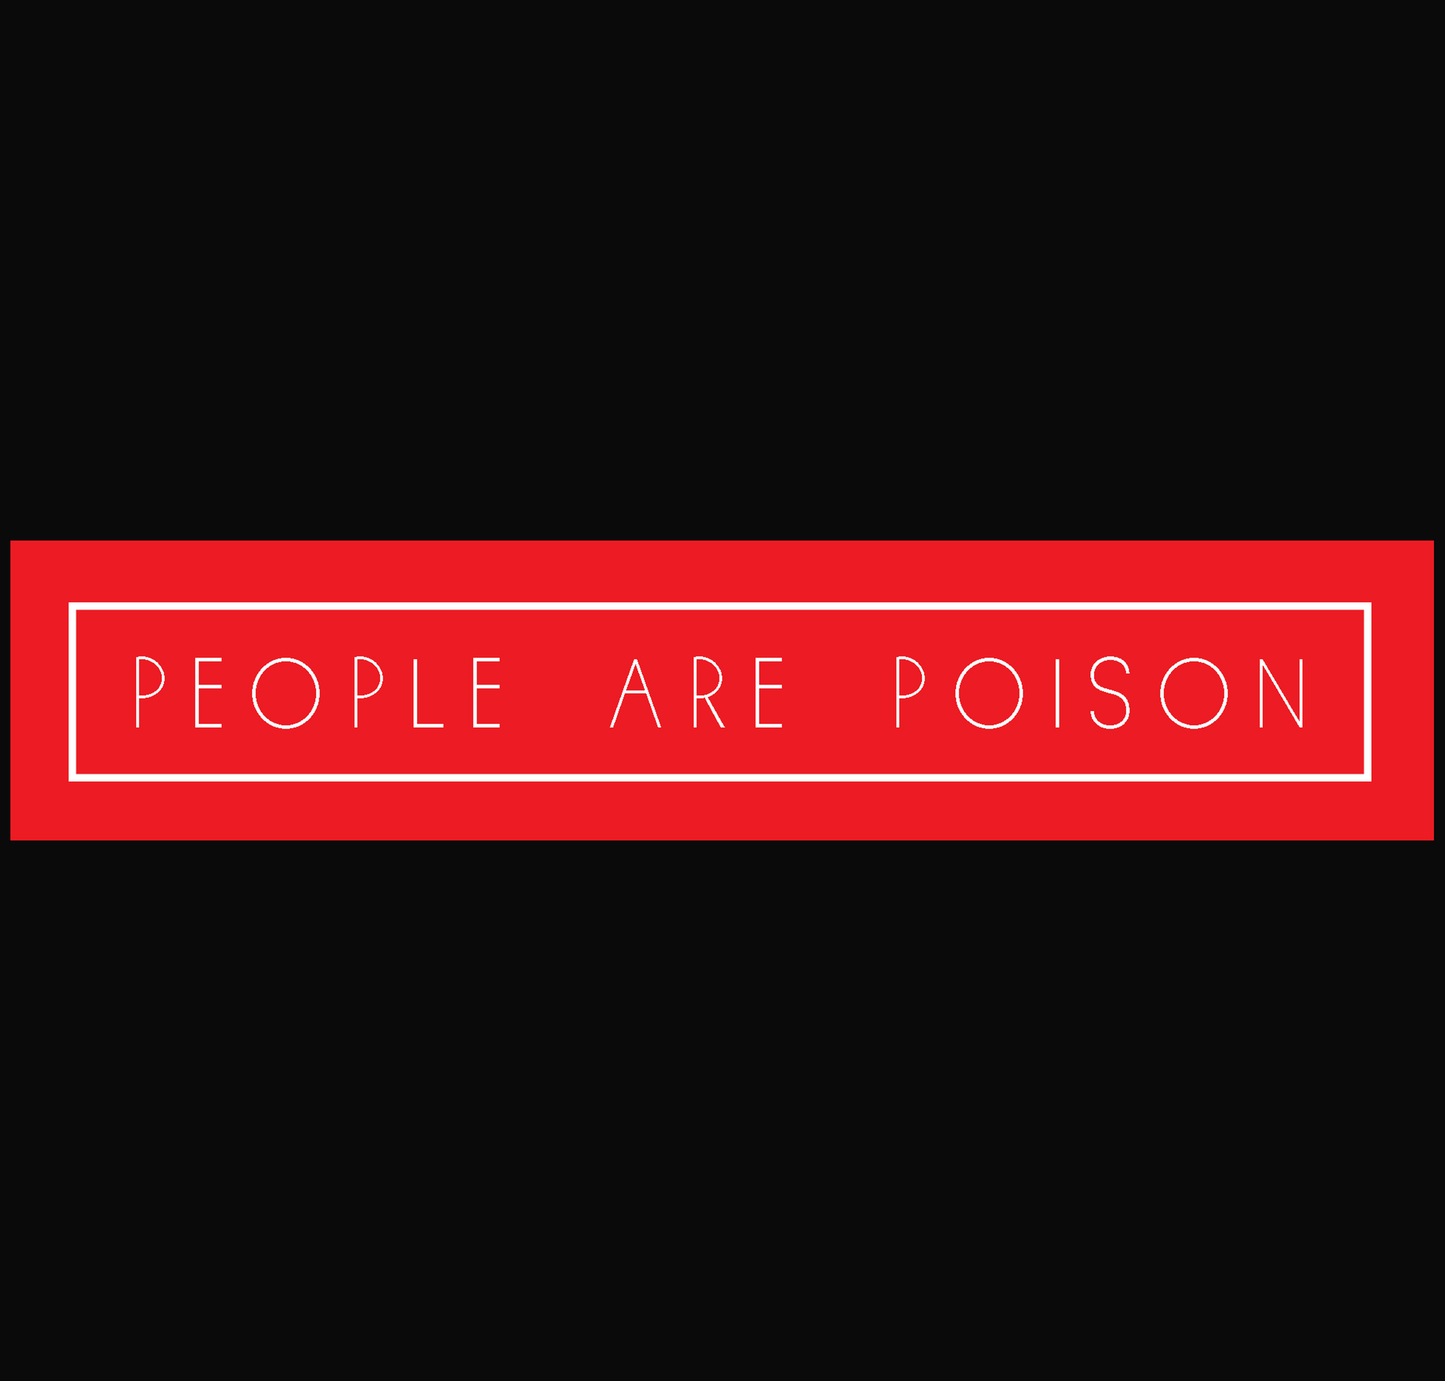 "PEOPLE ARE POISON" - HALF-SLEEVE T-SHIRT'S